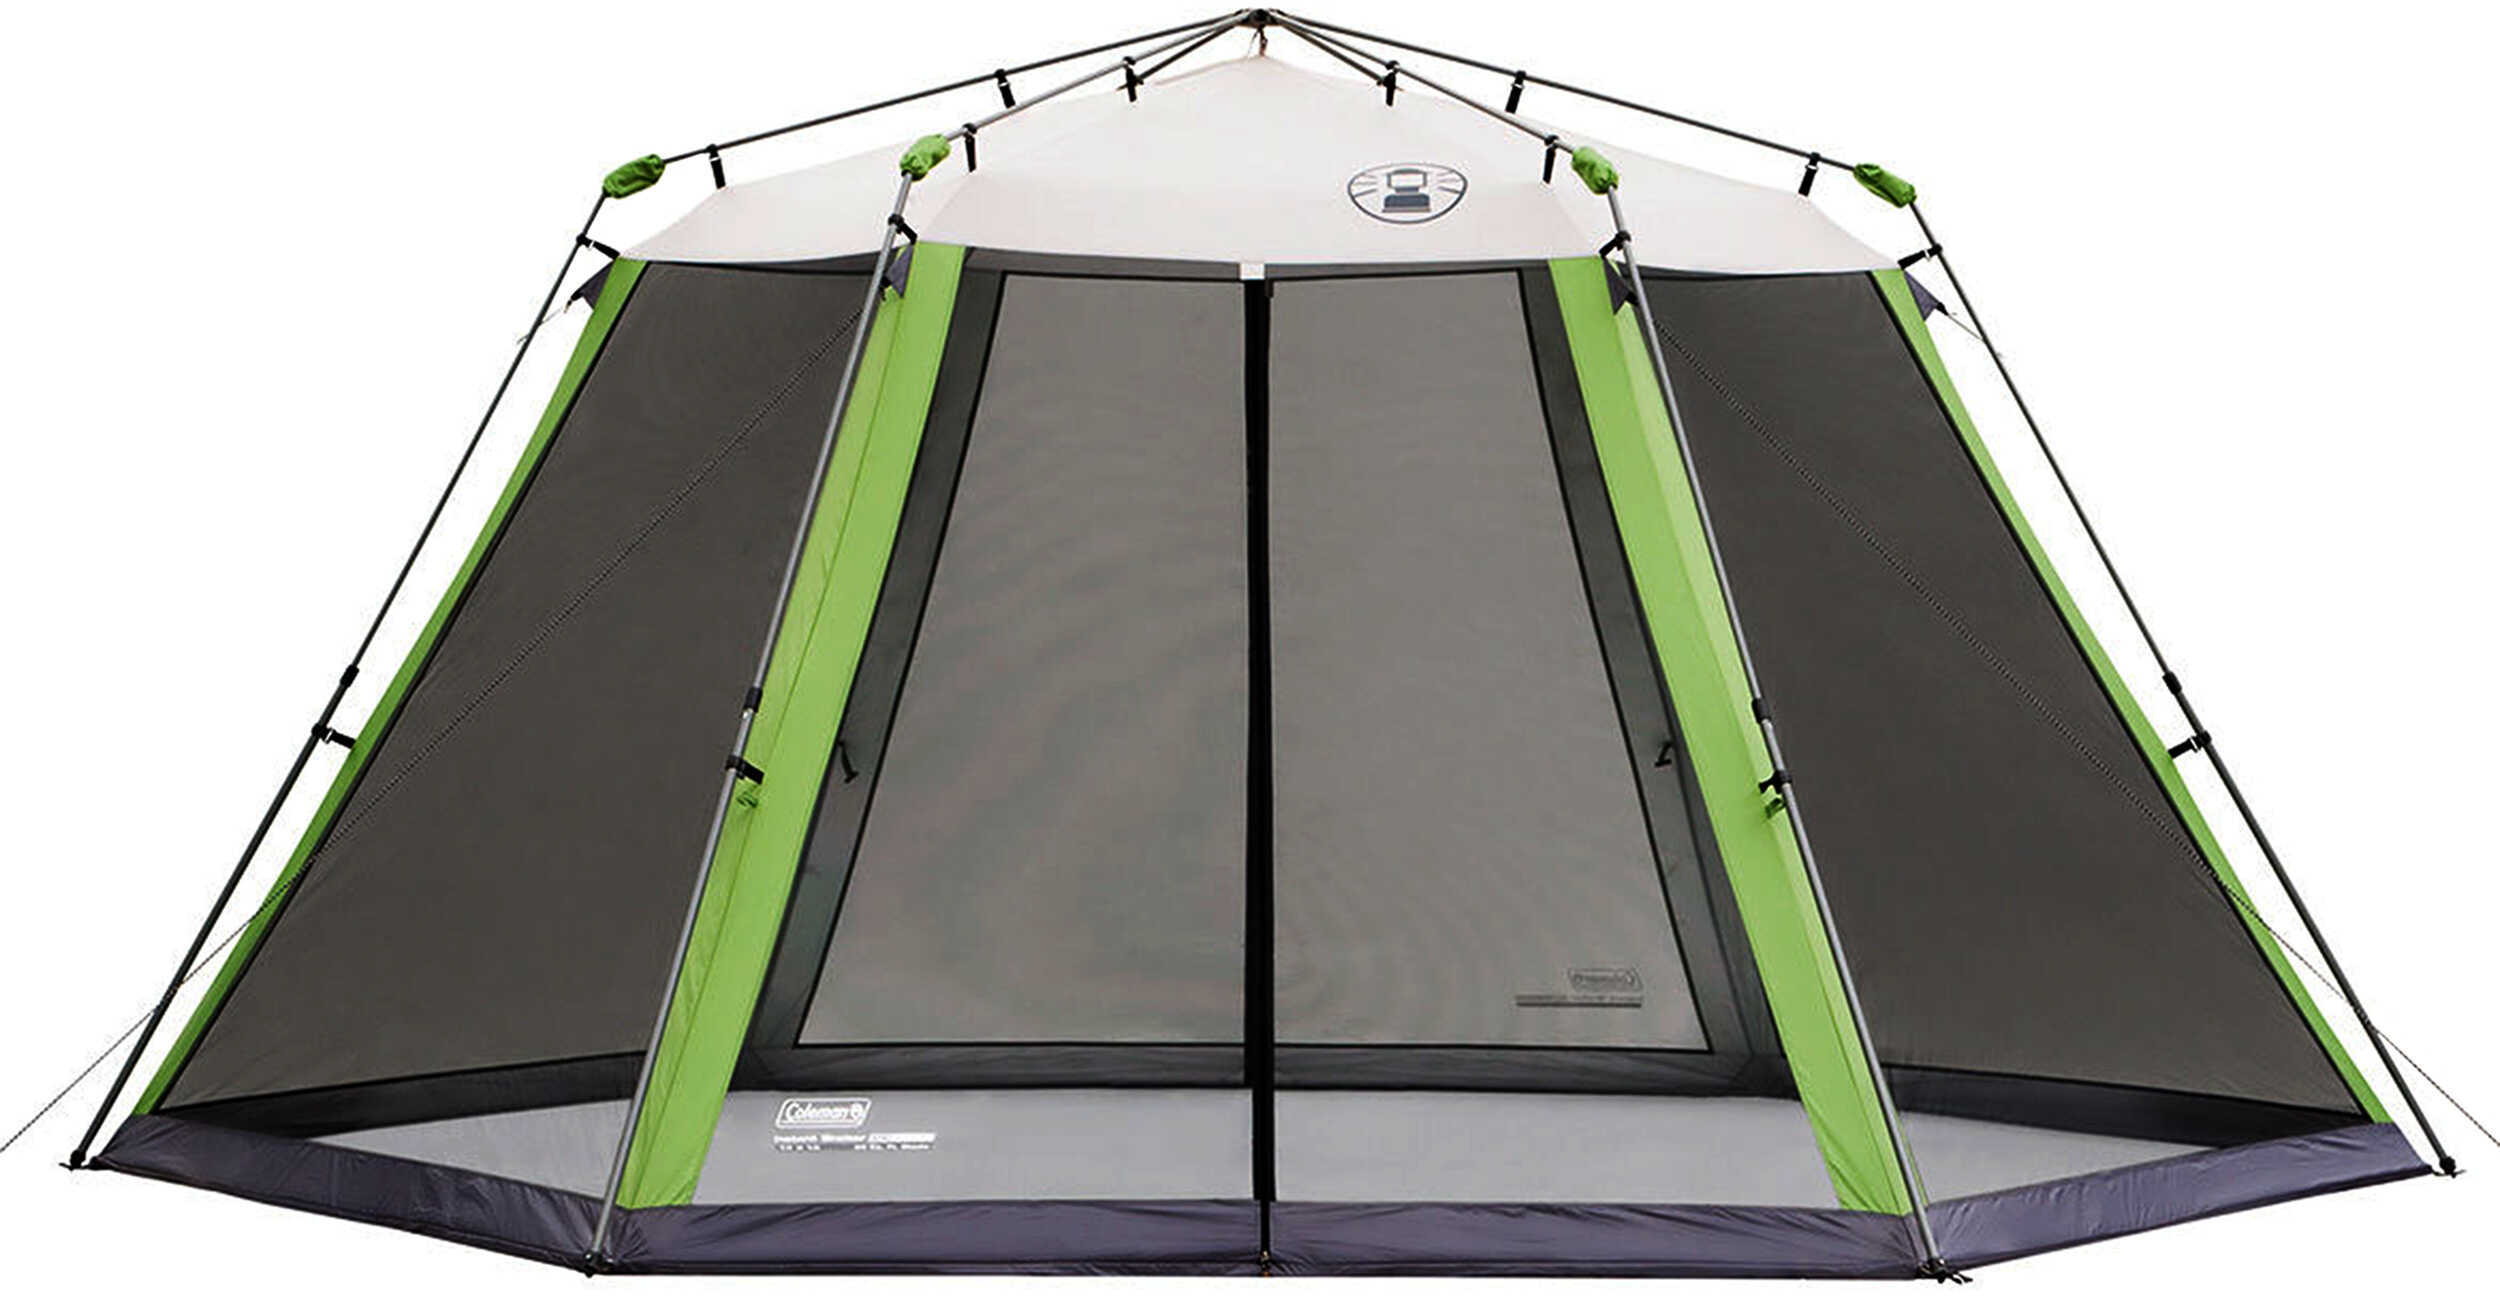 Coleman Shelter 15' x 13' Instant Screen Md: 2000004414